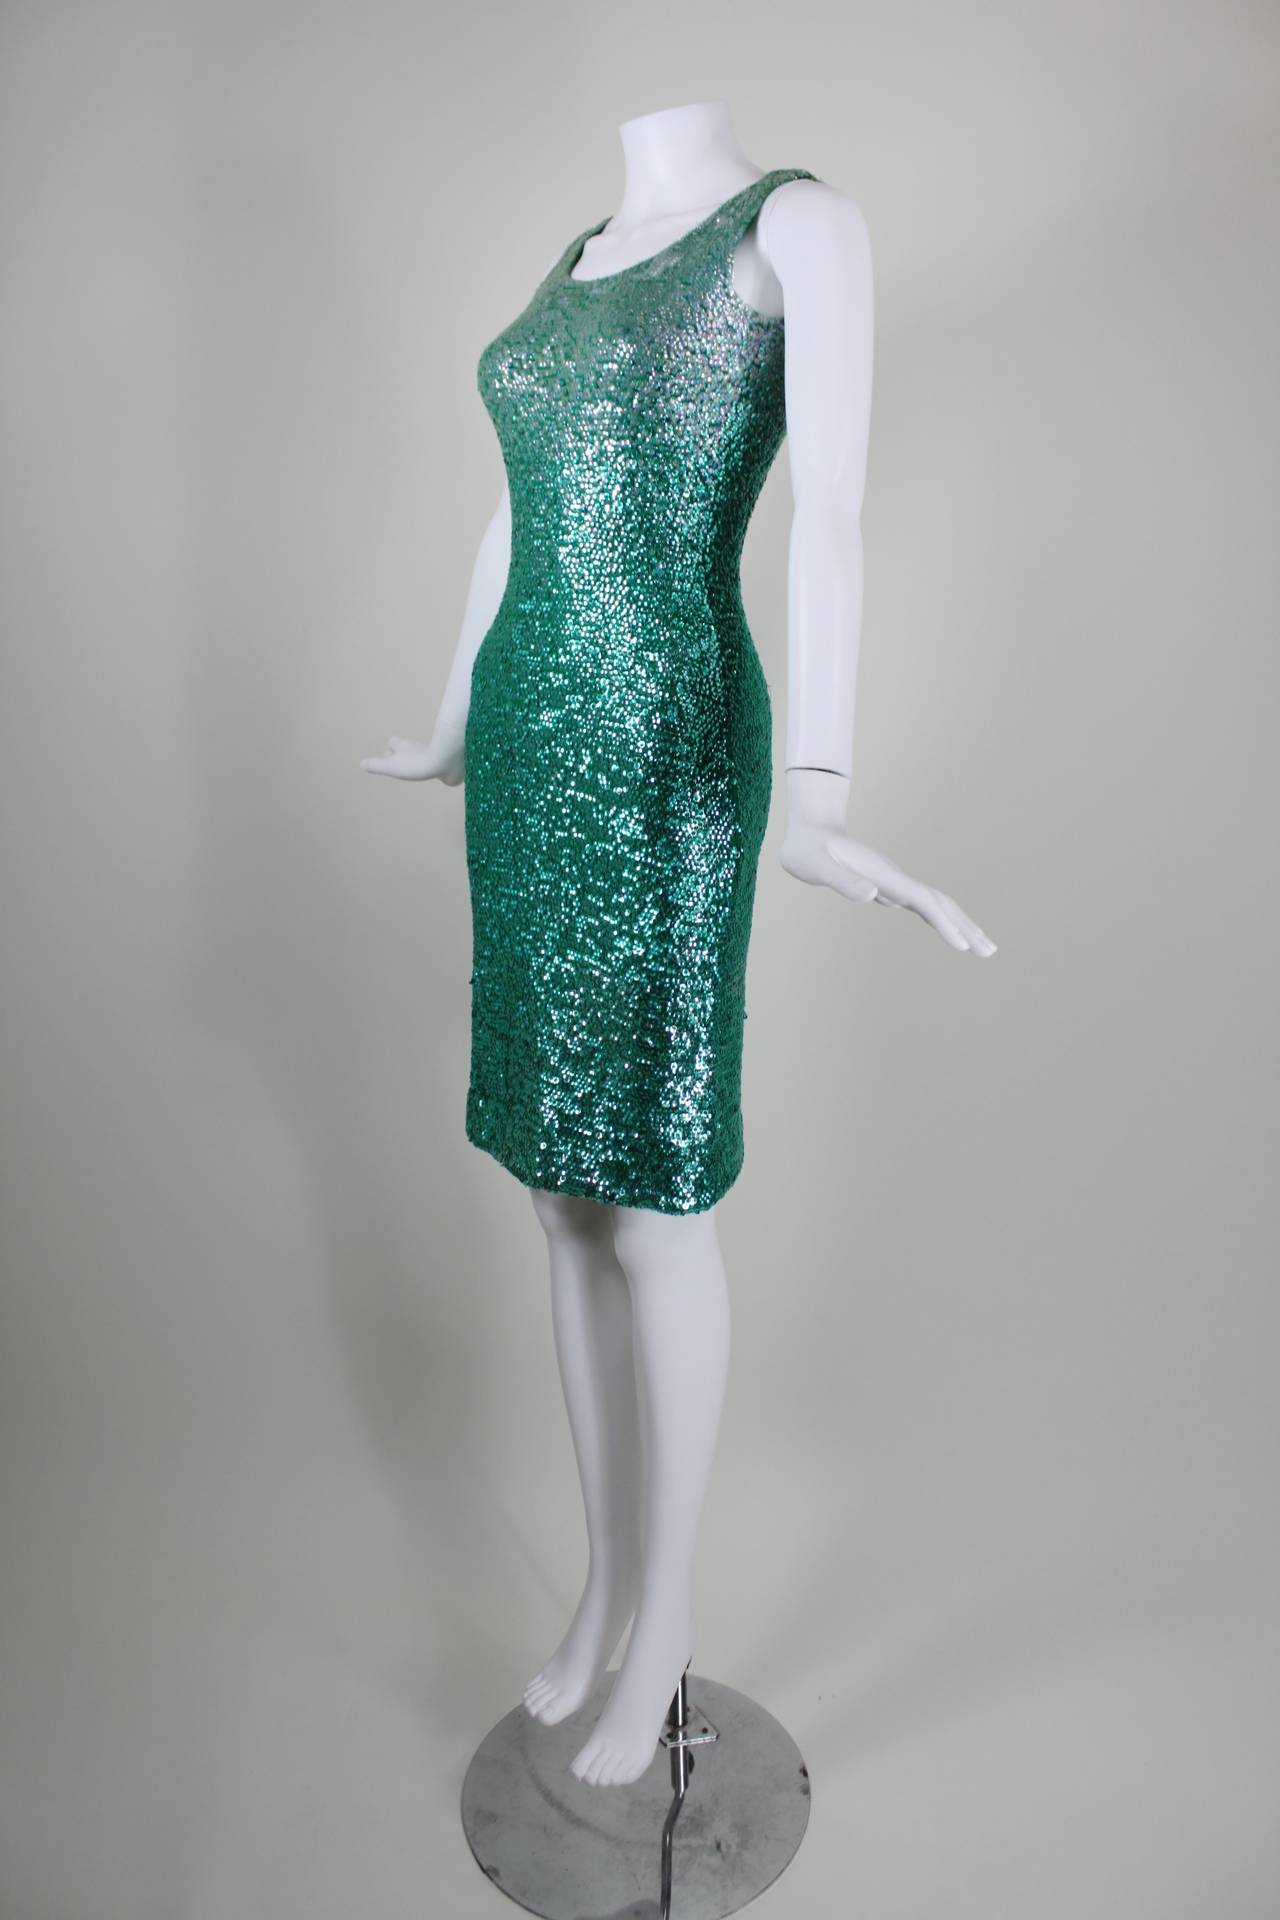 A fabulous knit dress from the 1960s, covered in graduating shades of green sequins. The dress is unlined and zips in the back. Slinky silhouette.